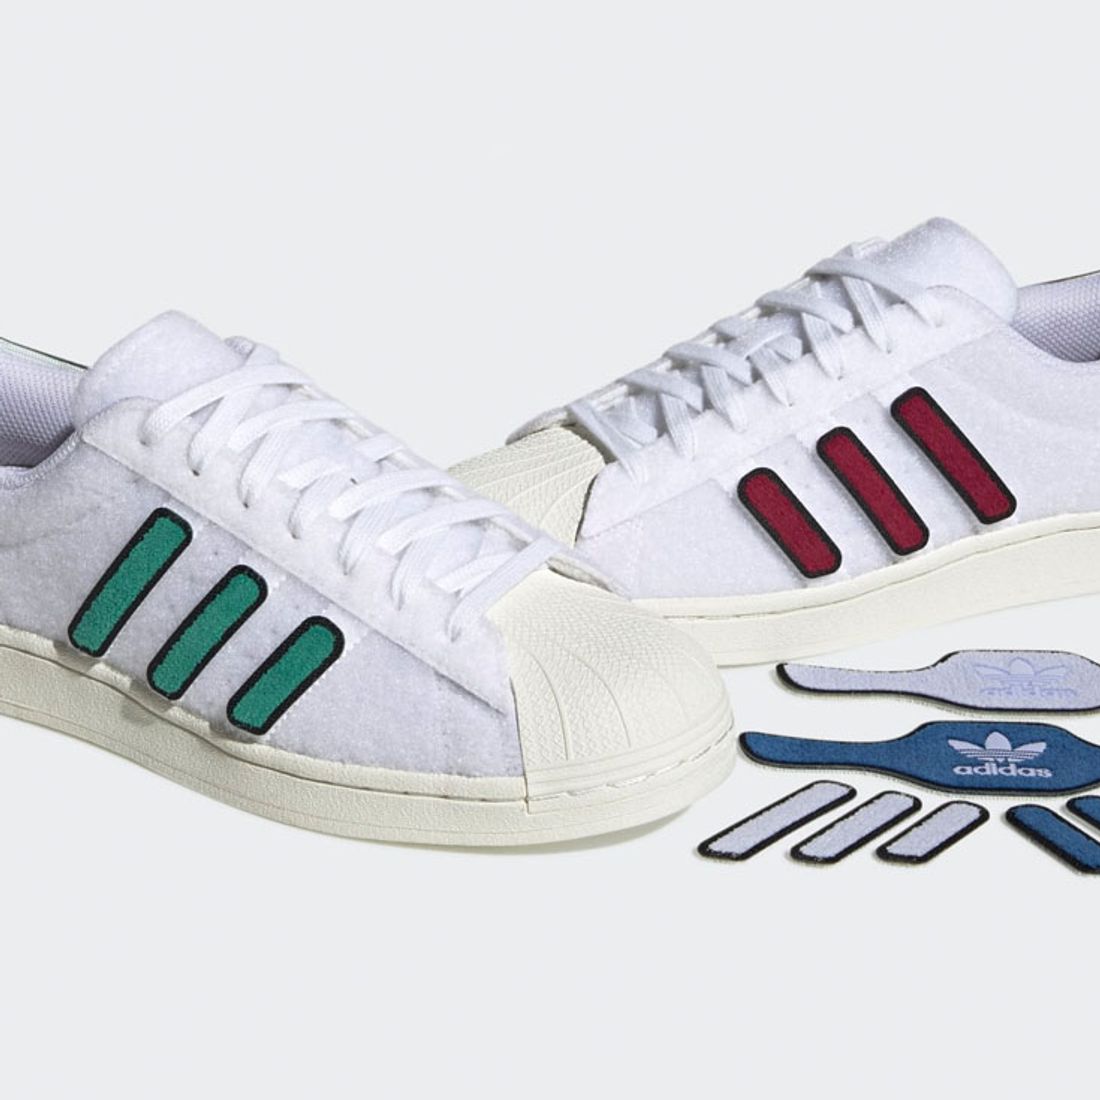 This adidas Changes Its Stripes - Sneaker Freaker